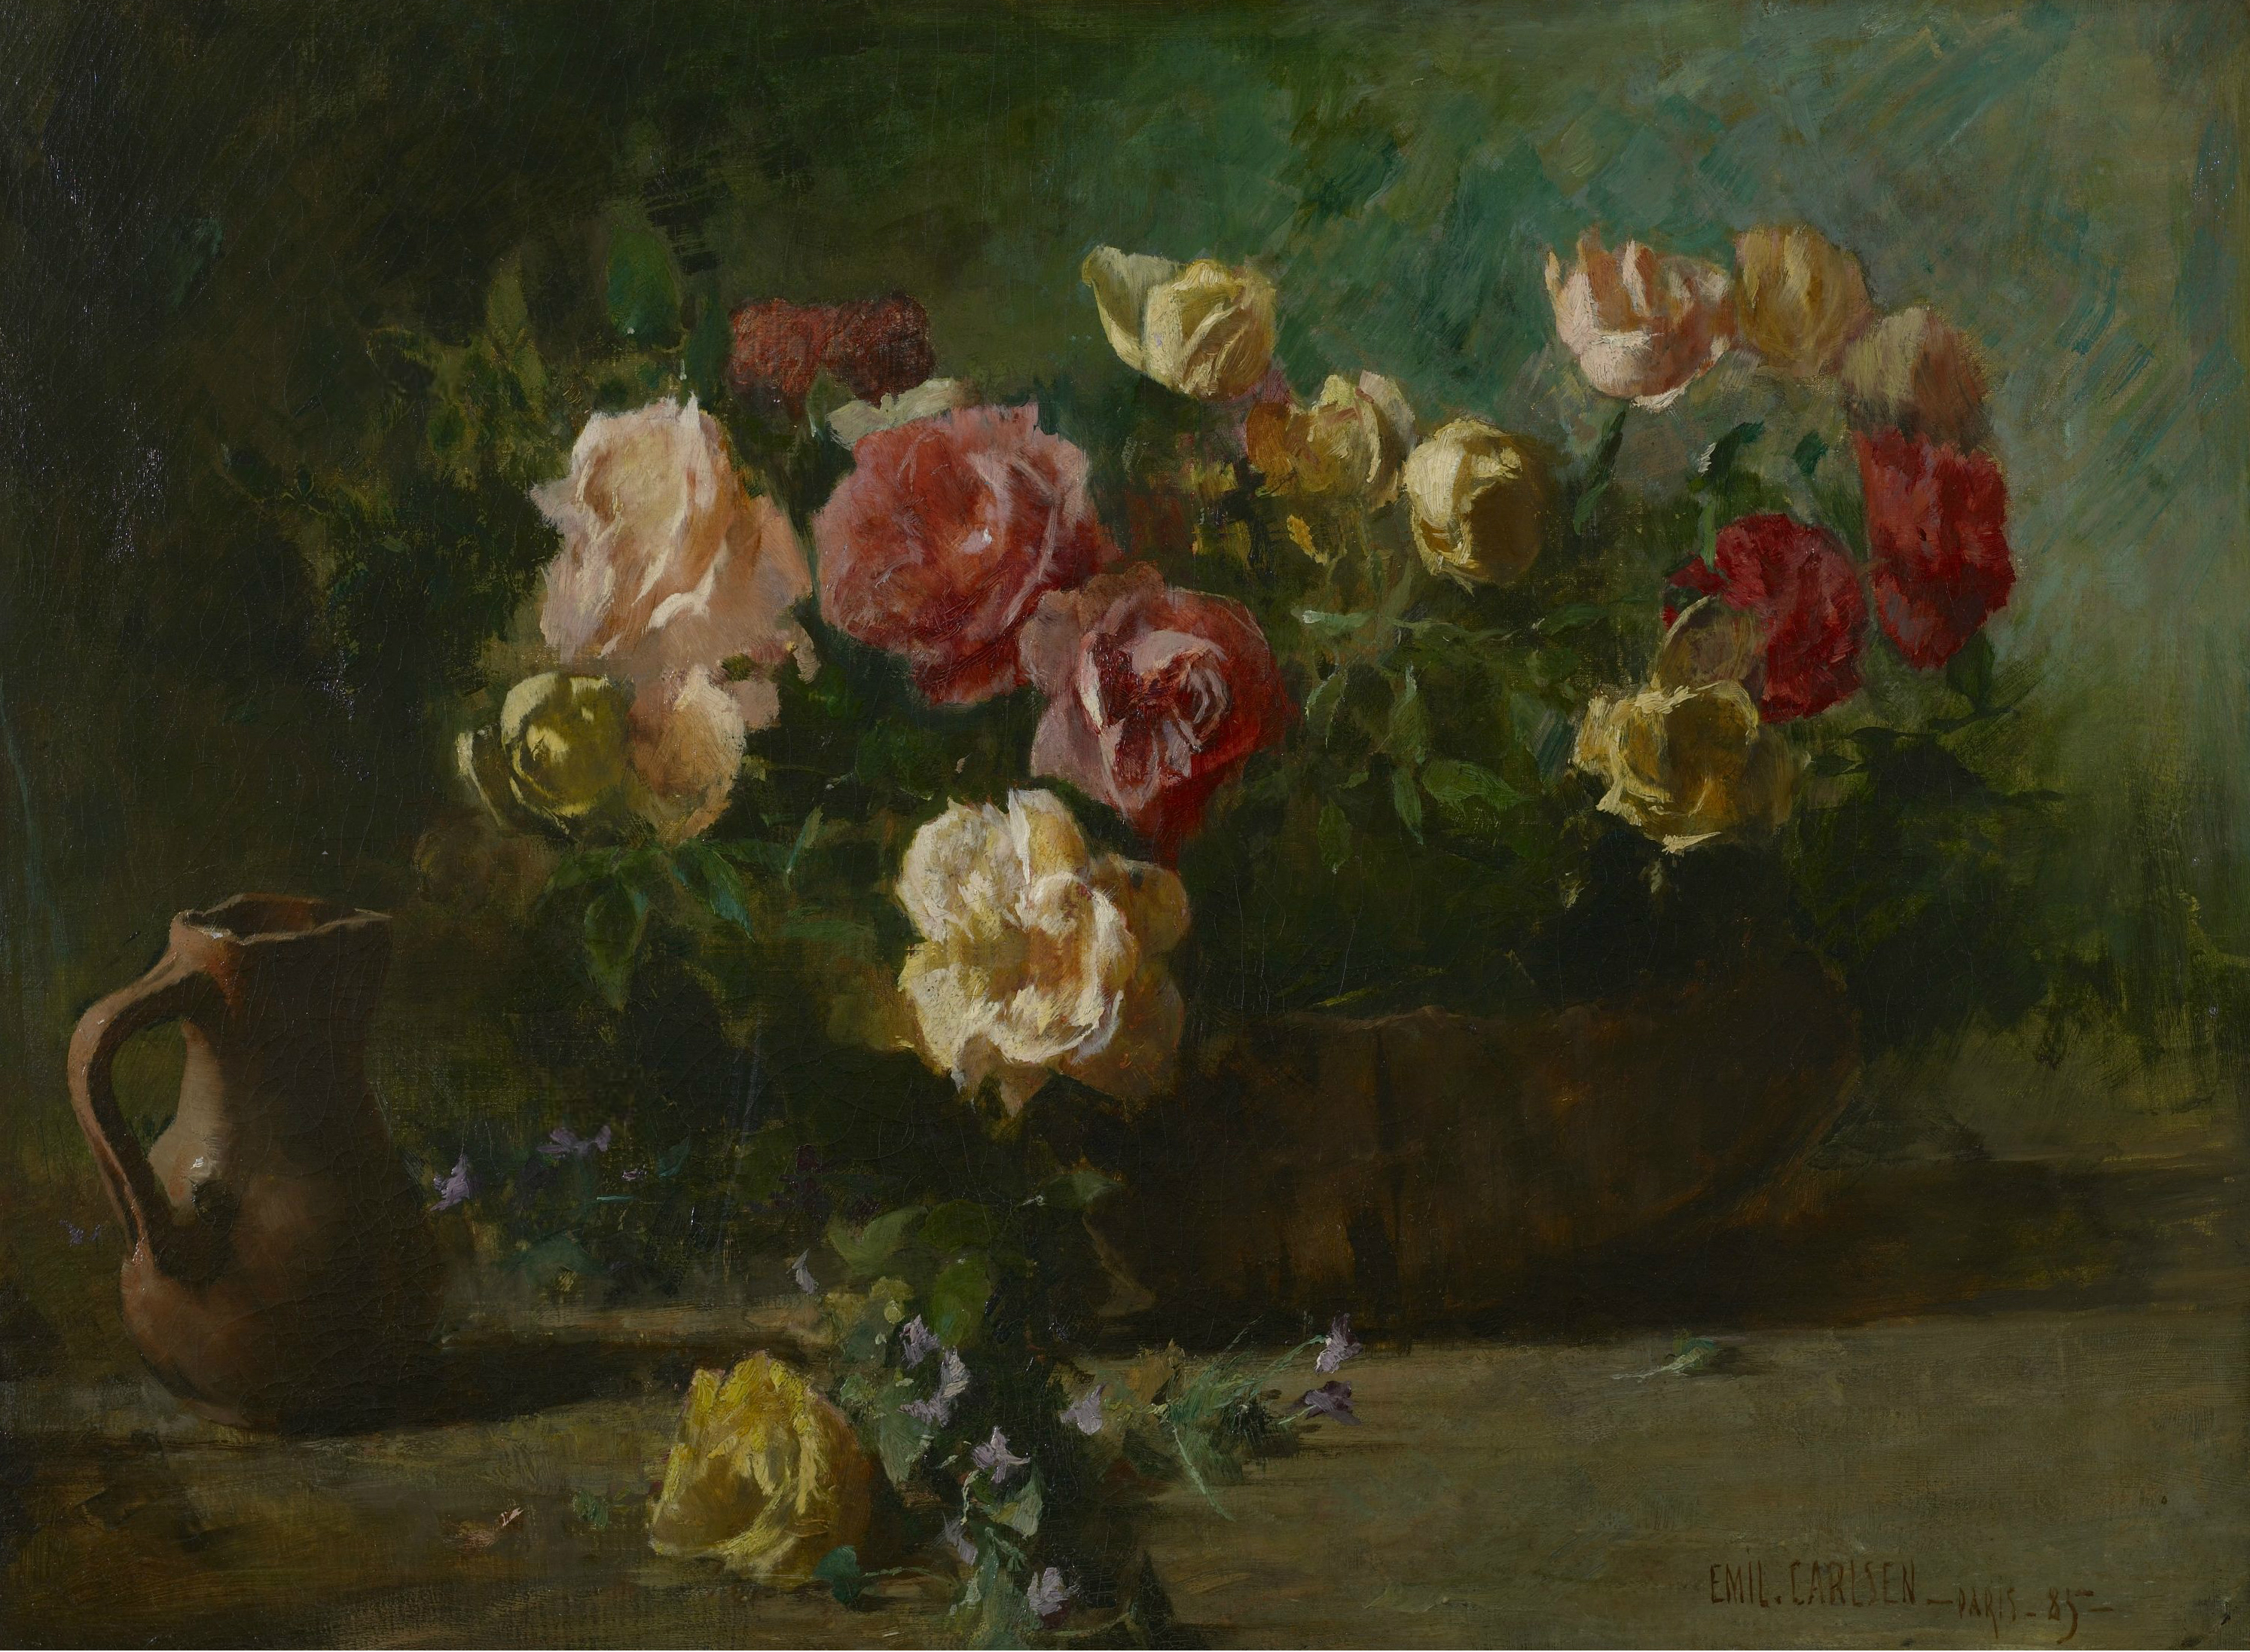 Emil Carlsen Still Life with Flowers (also called Roses), 1885